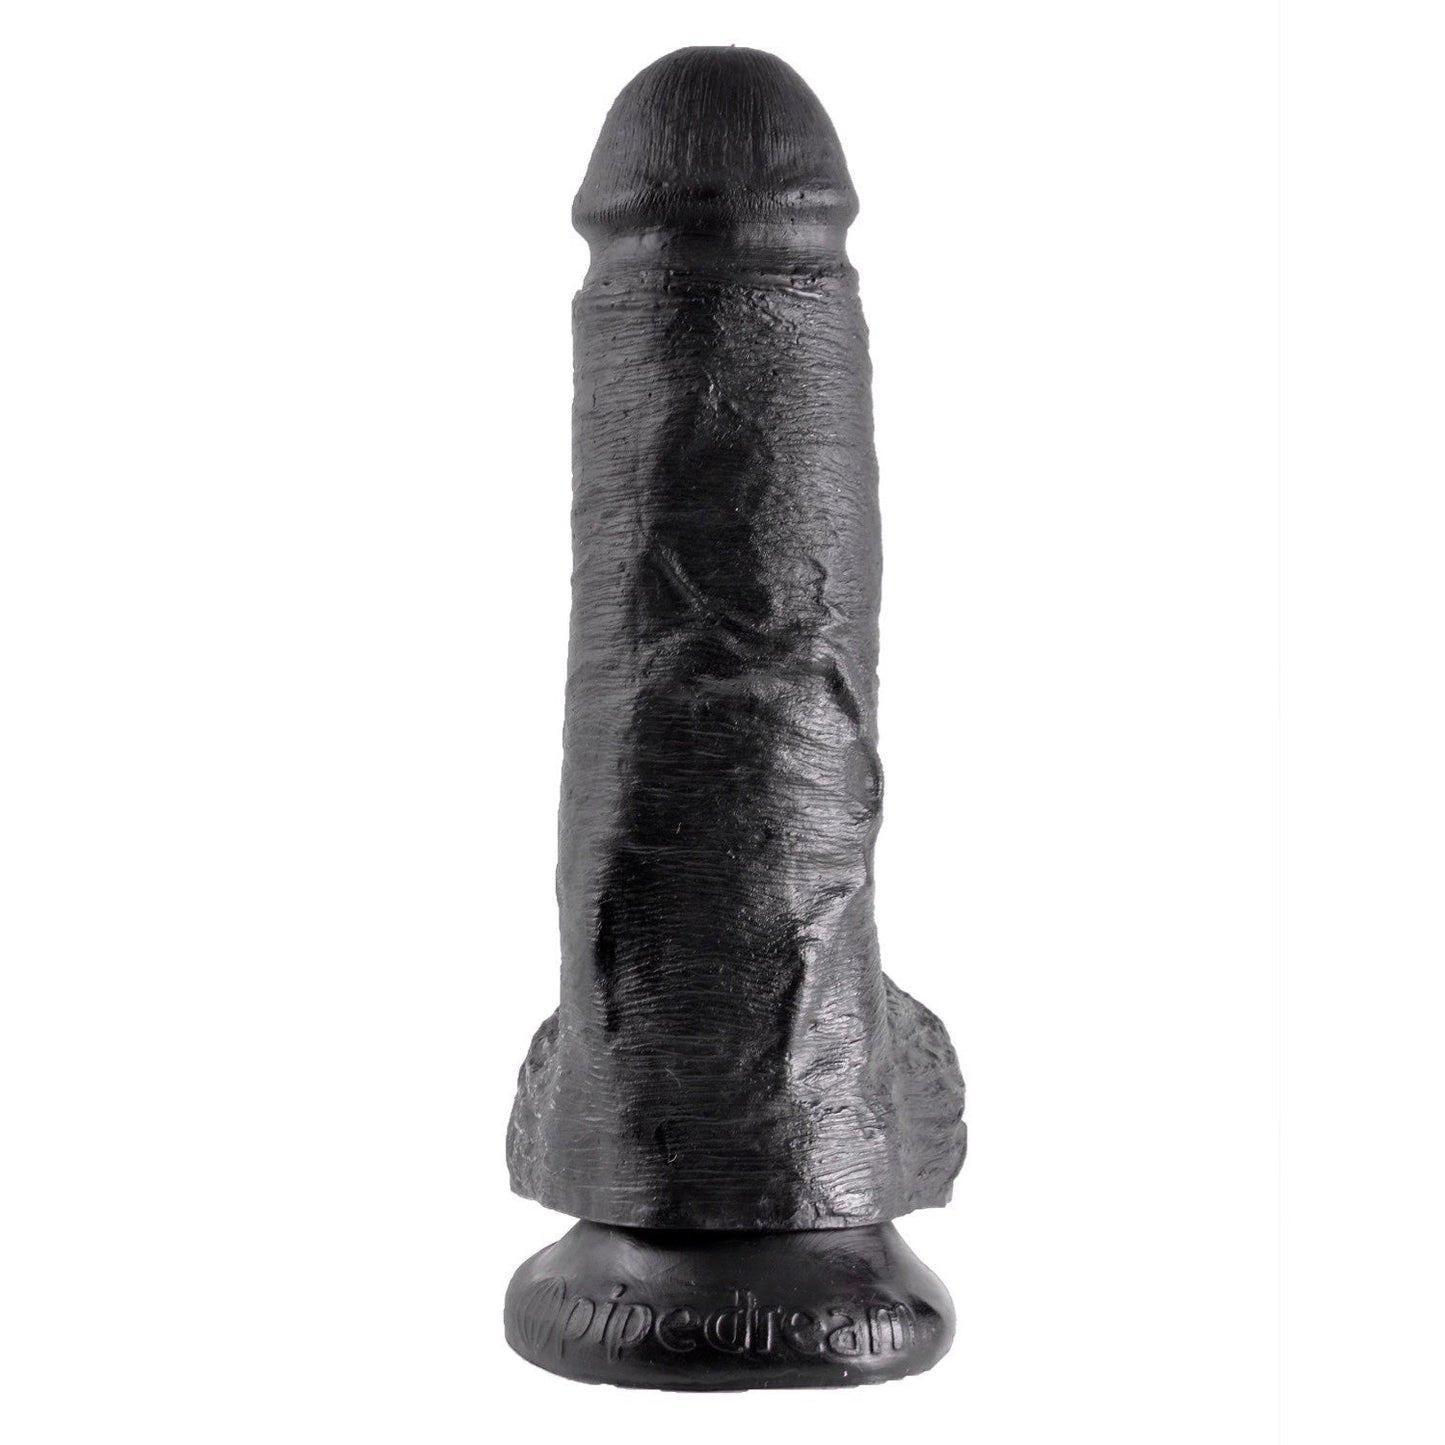 8" Cock With Balls - Black 20.3 cm (8") Dong